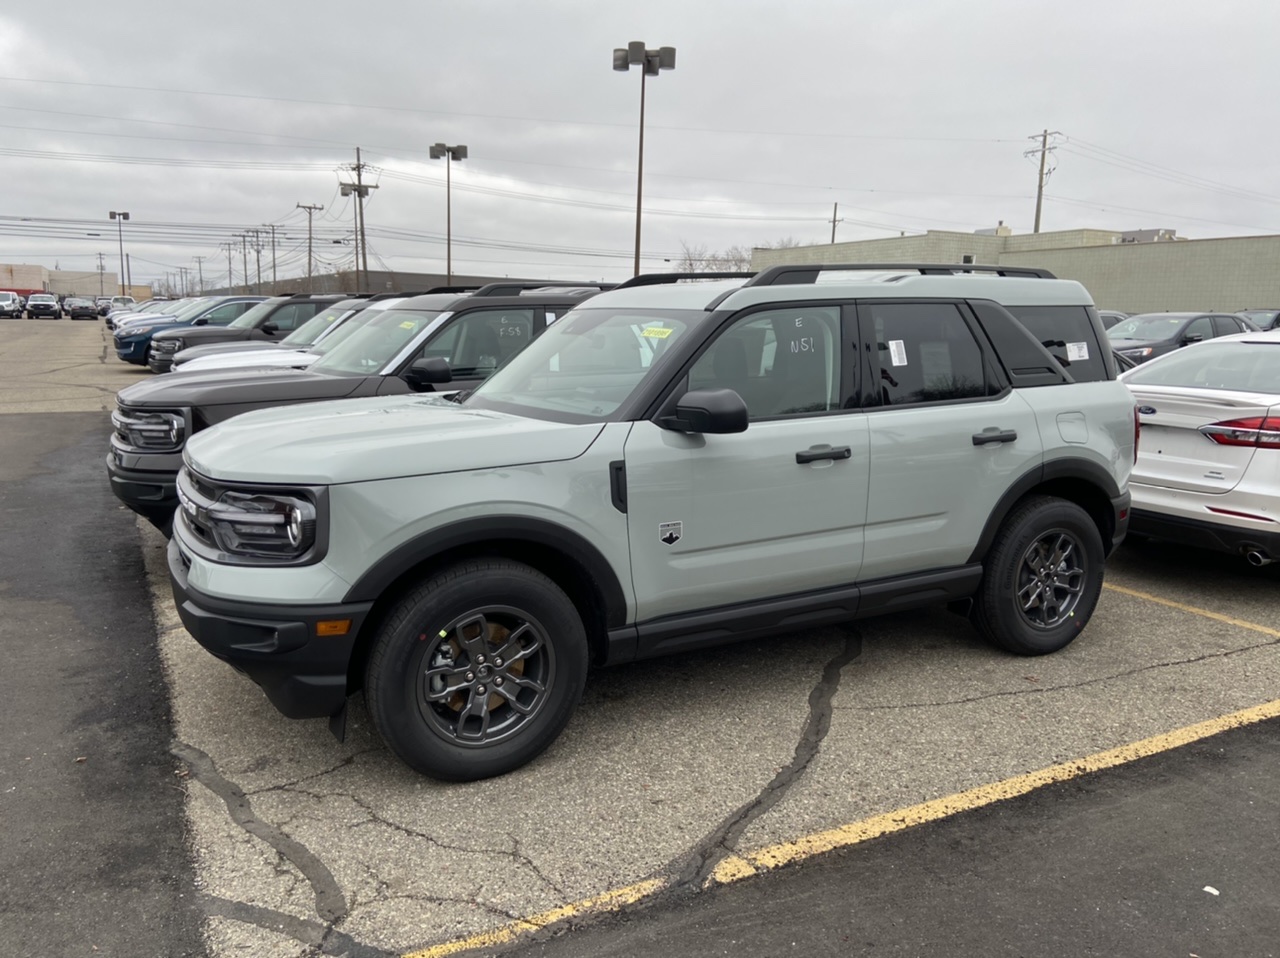 Ford Bronco CACTUS GRAY THREAD!!!! if you’re choosing cactus gray lemme know. I think it’s the best color available at the moment. F501B866-7AB6-4F9E-965B-ACBECAF5D474